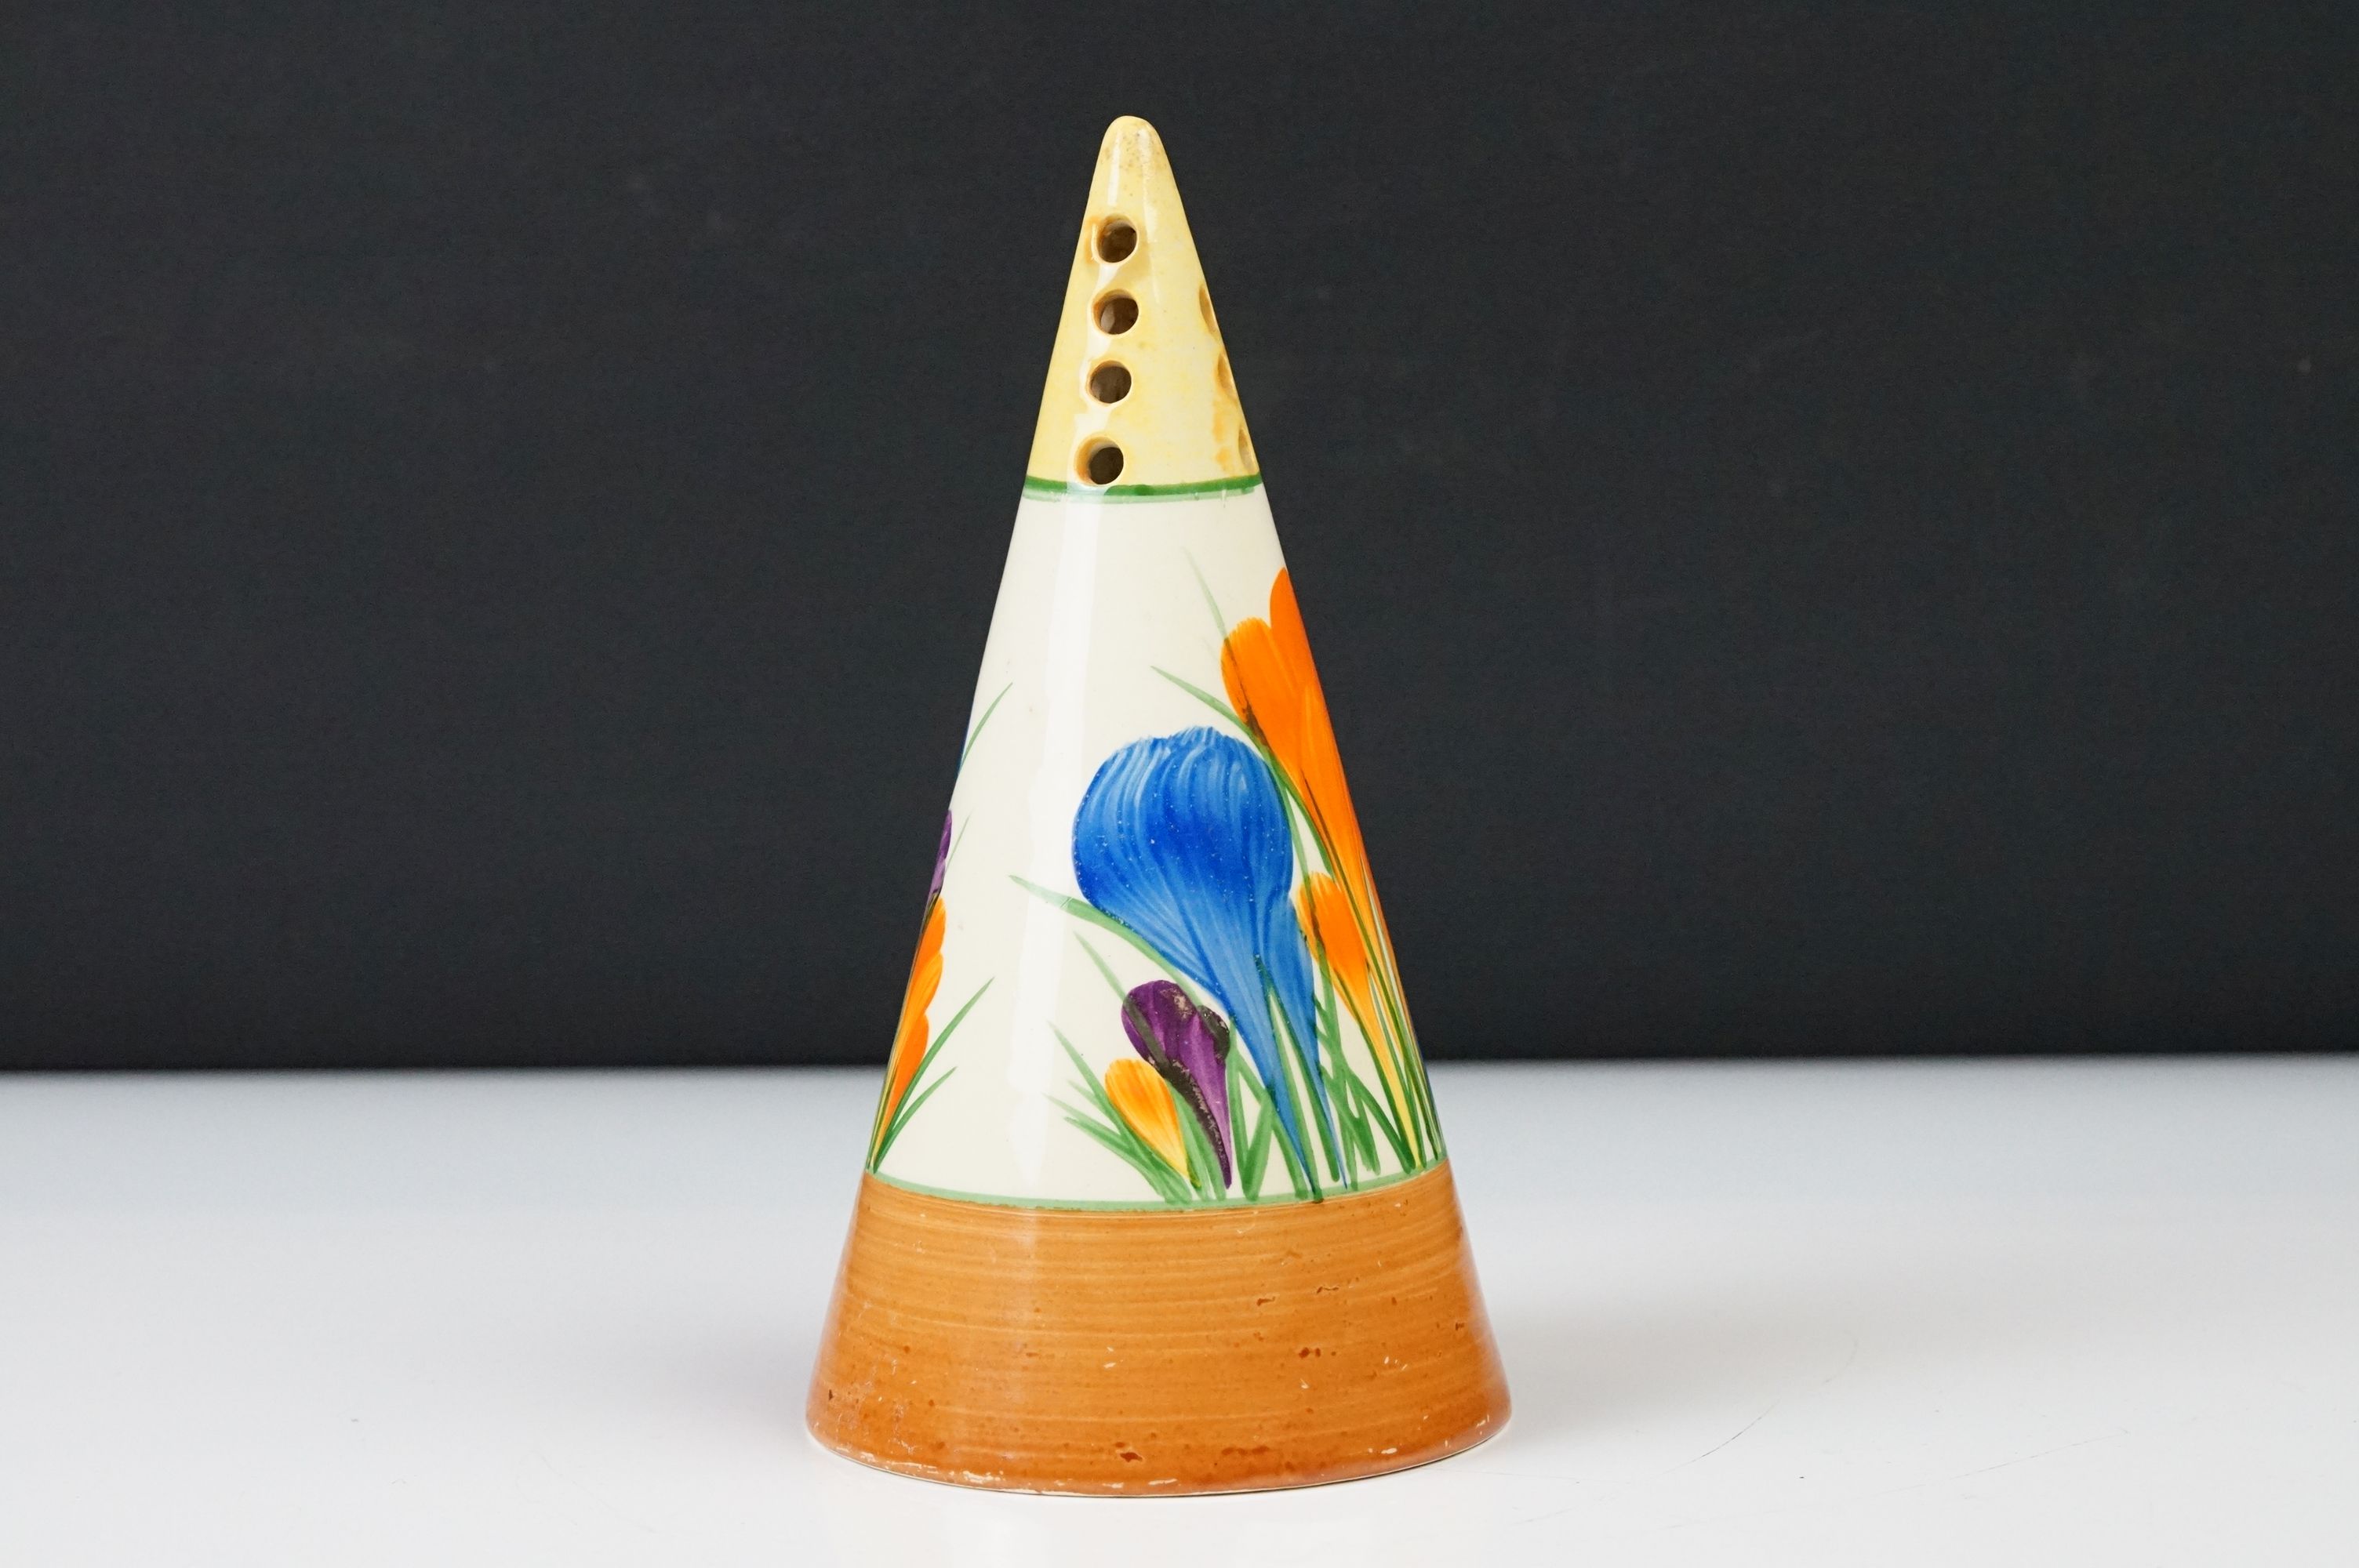 Clarice Cliff Pottery Bizarre Conical Sugar Shaker in the crocus pattern, 14cm high - Image 4 of 6